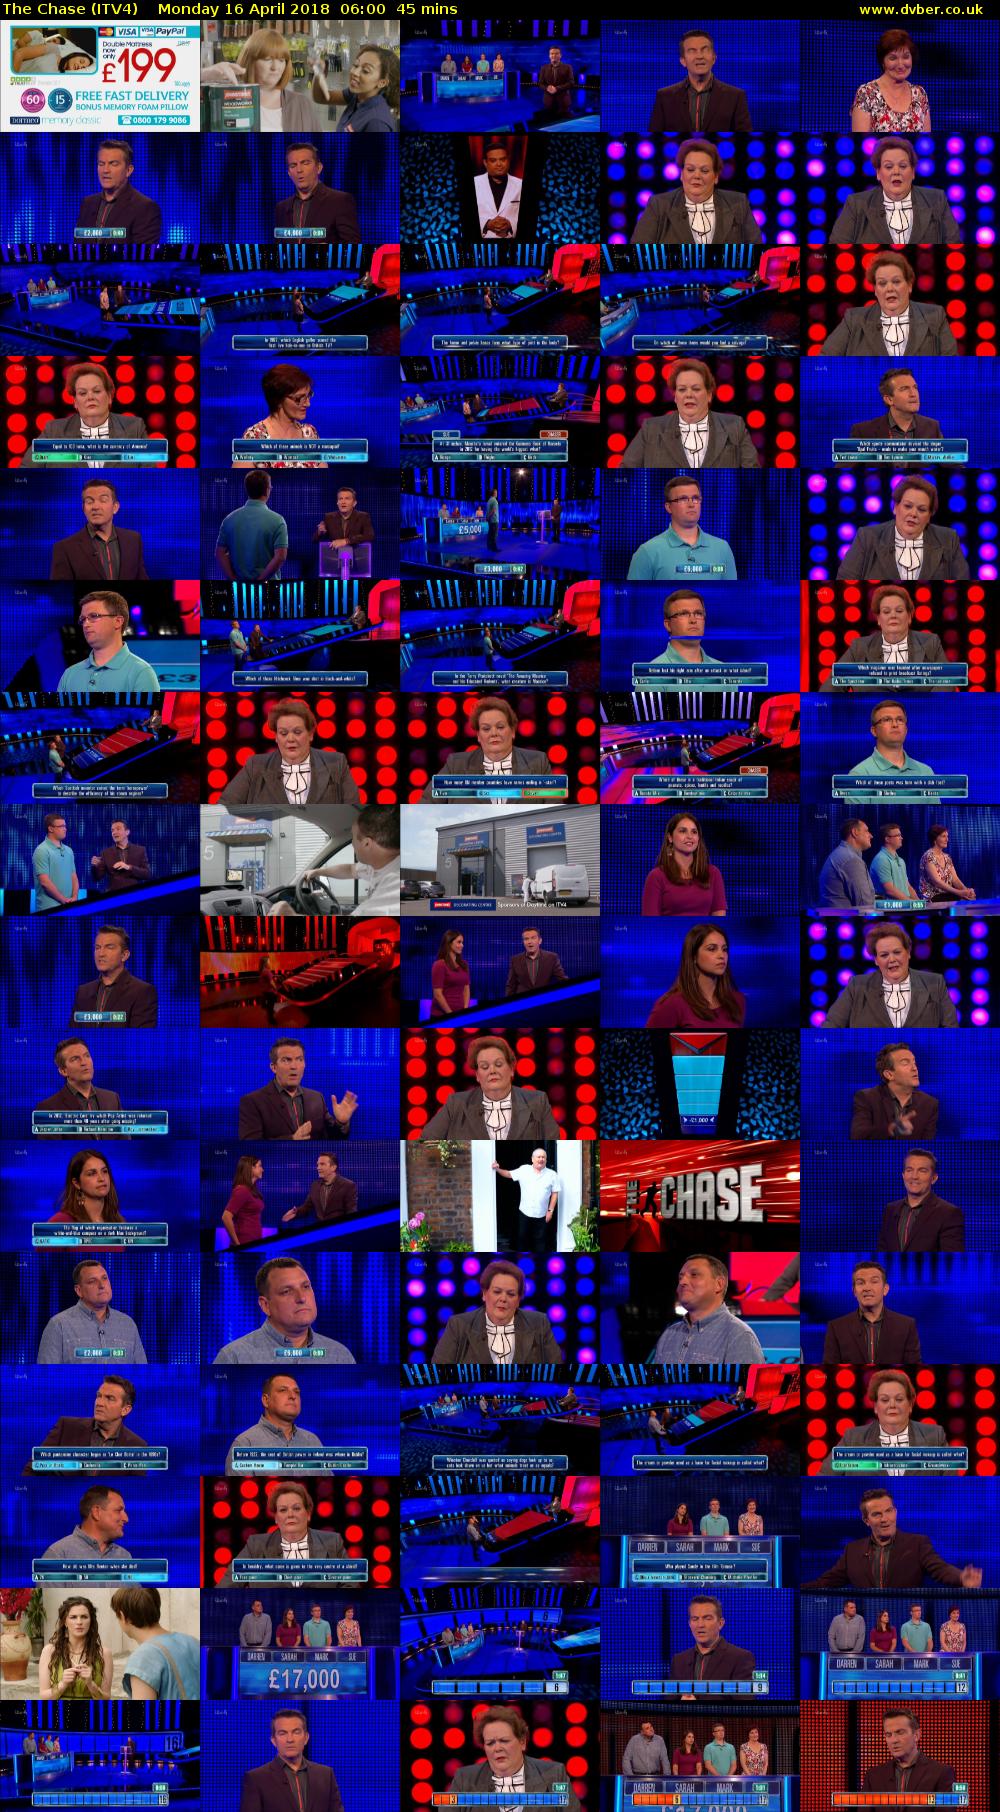 The Chase (ITV4) Monday 16 April 2018 06:00 - 06:45